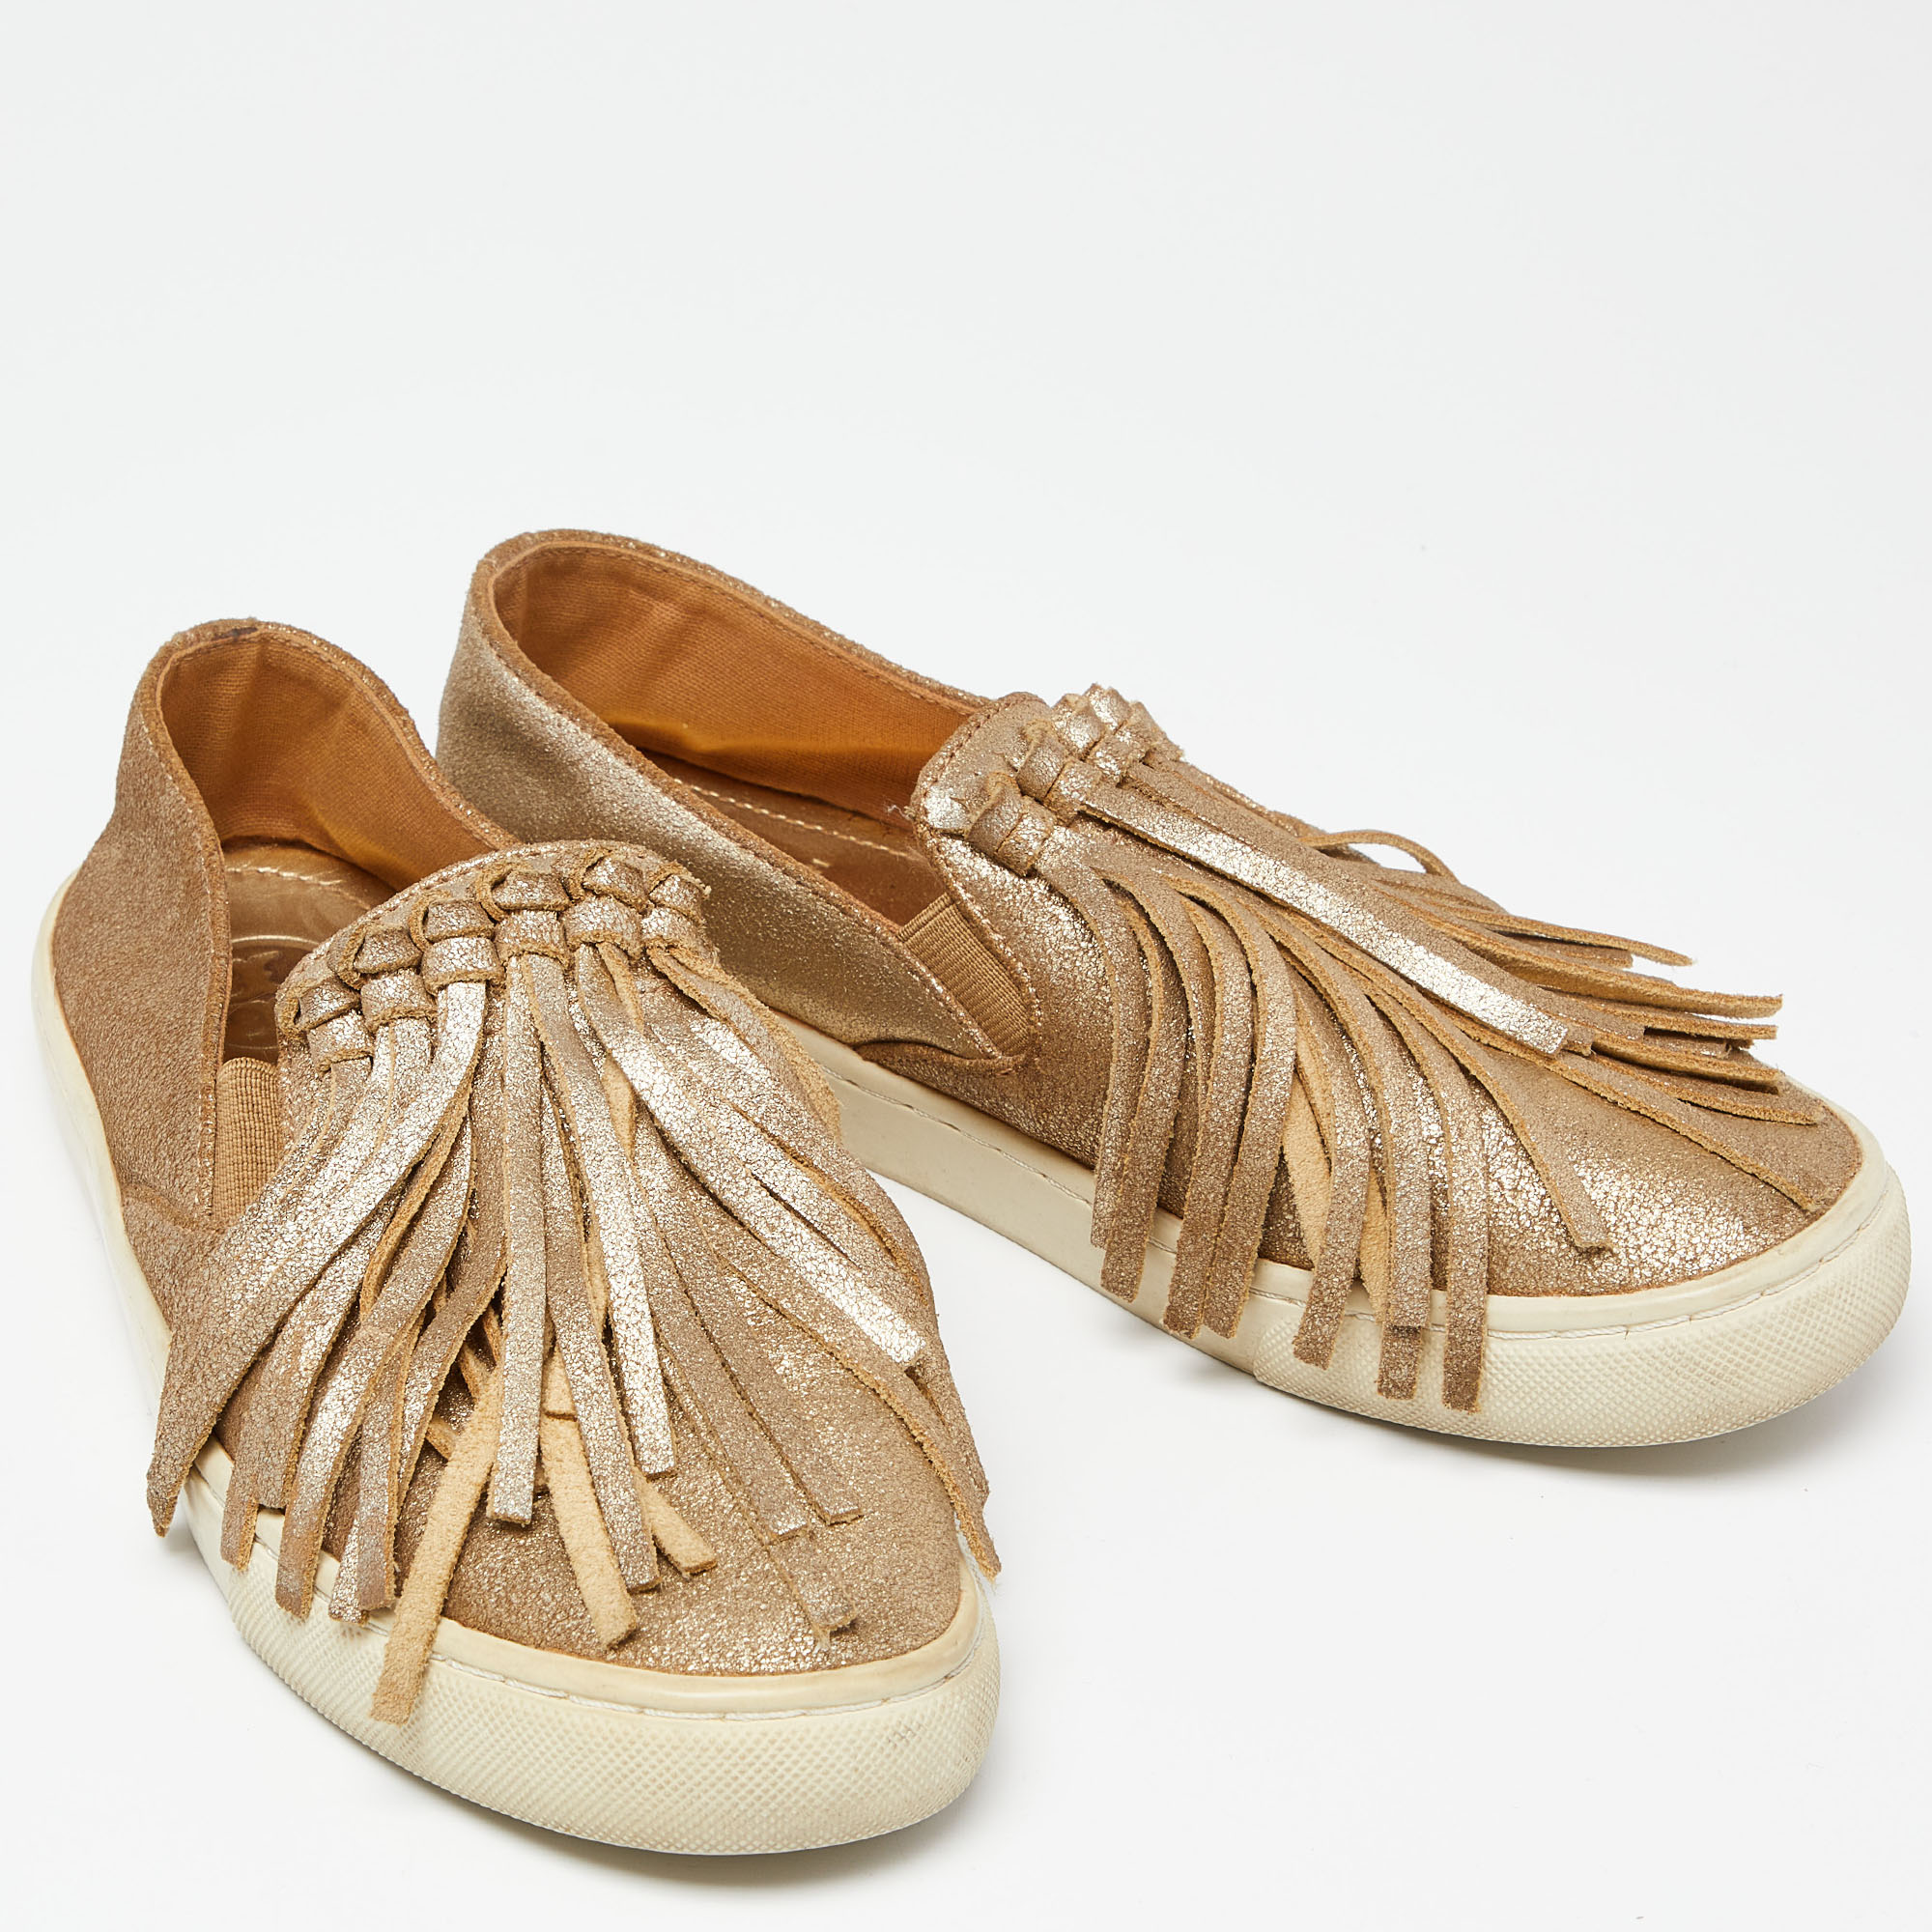 Tory Burch Gold Textured Suede Fringe Detail Slip On Sneakers Size 37.5